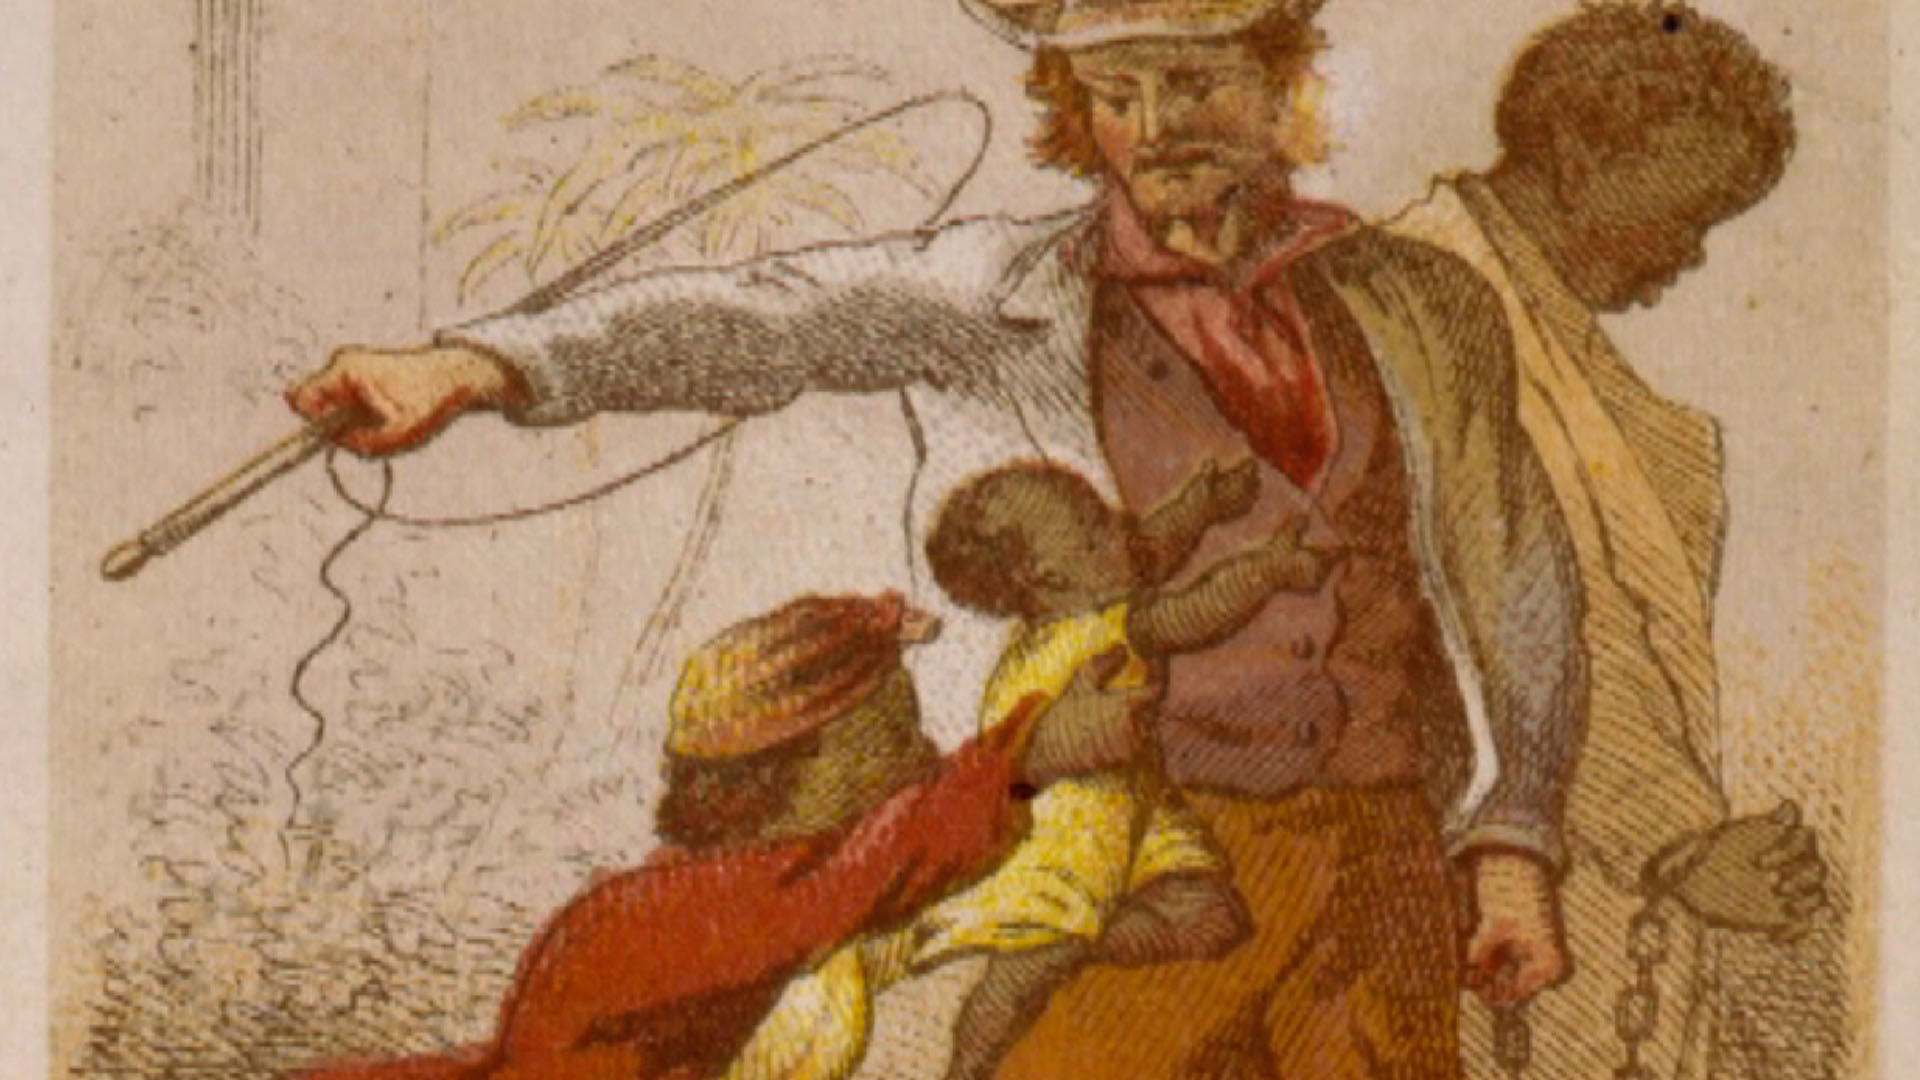 The Shocking Photo of 'Whipped Peter' That Made Slavery's Brutality  Impossible to Deny